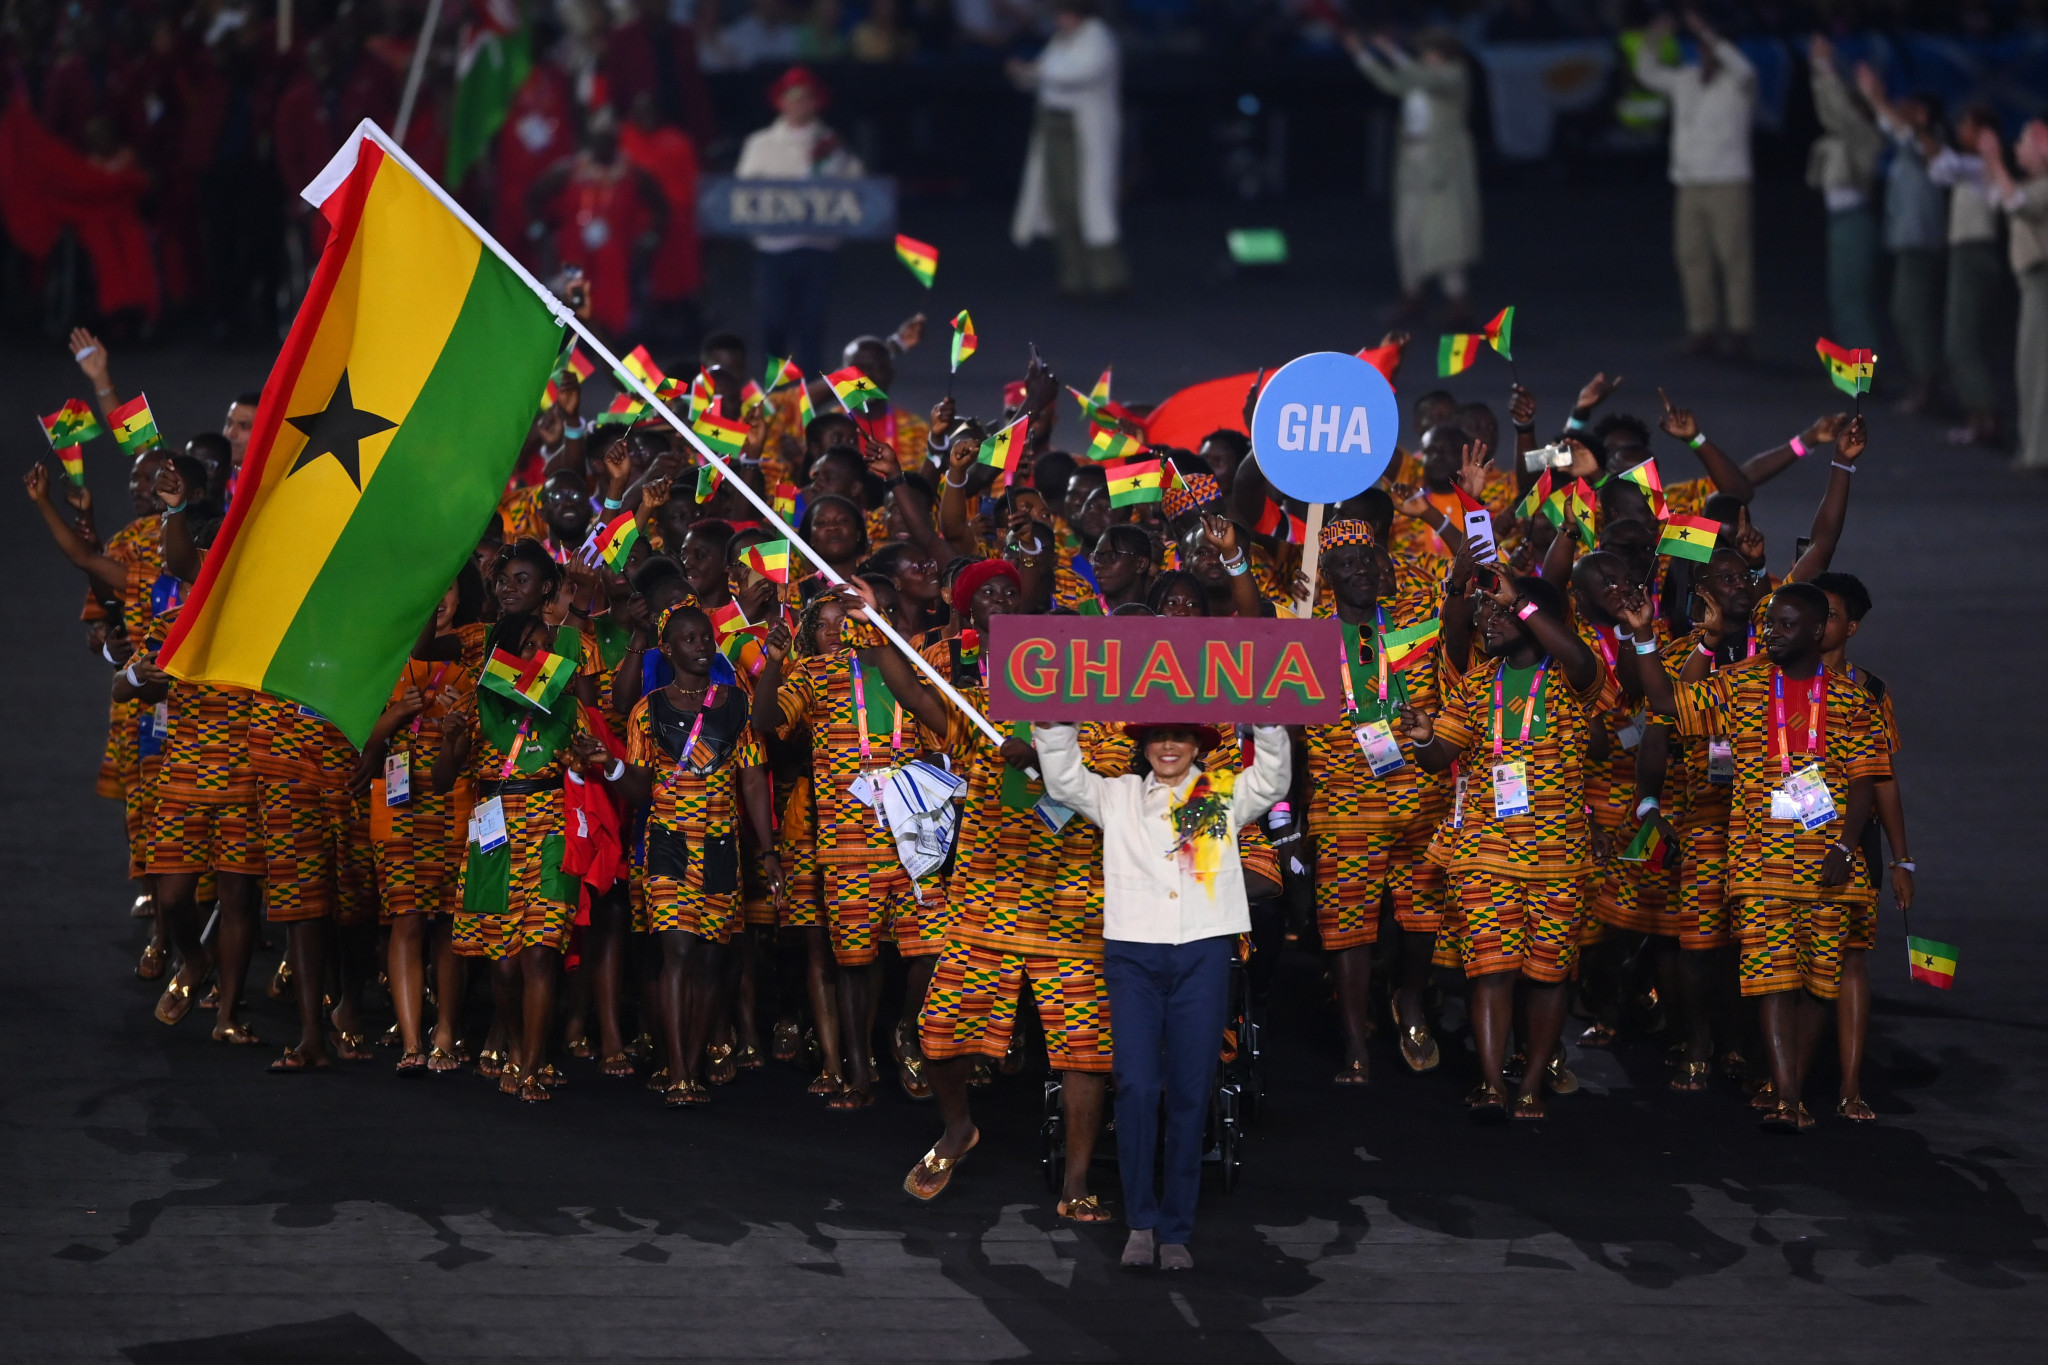 Ghana is due to stage the African Games for the first time next year, although there are concerns over the pace of construction projects ©Getty Images